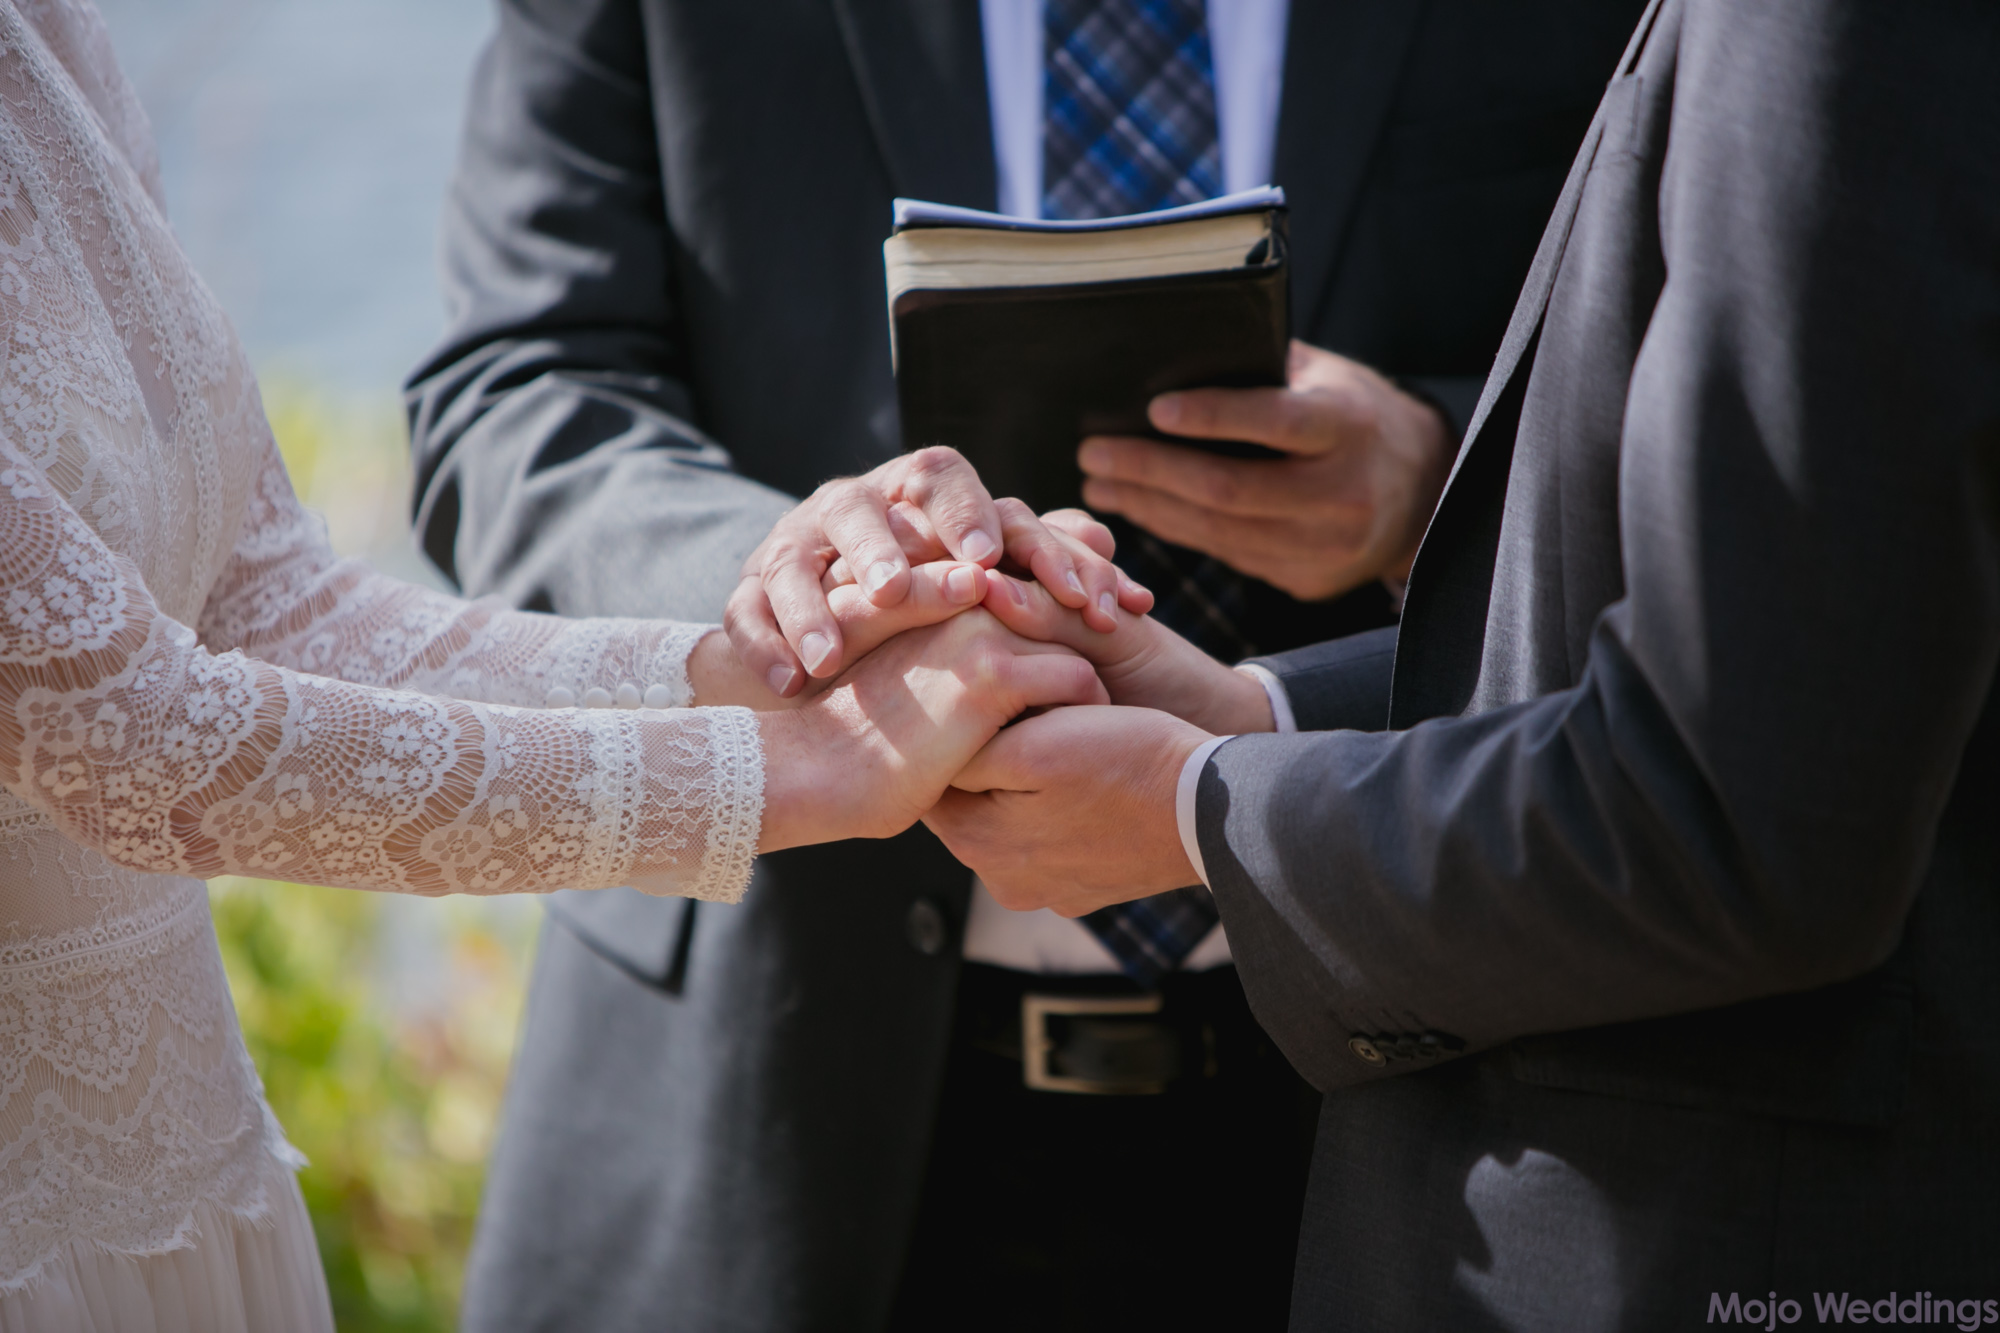 A close up of the hands of the bride, groom, and officiant.